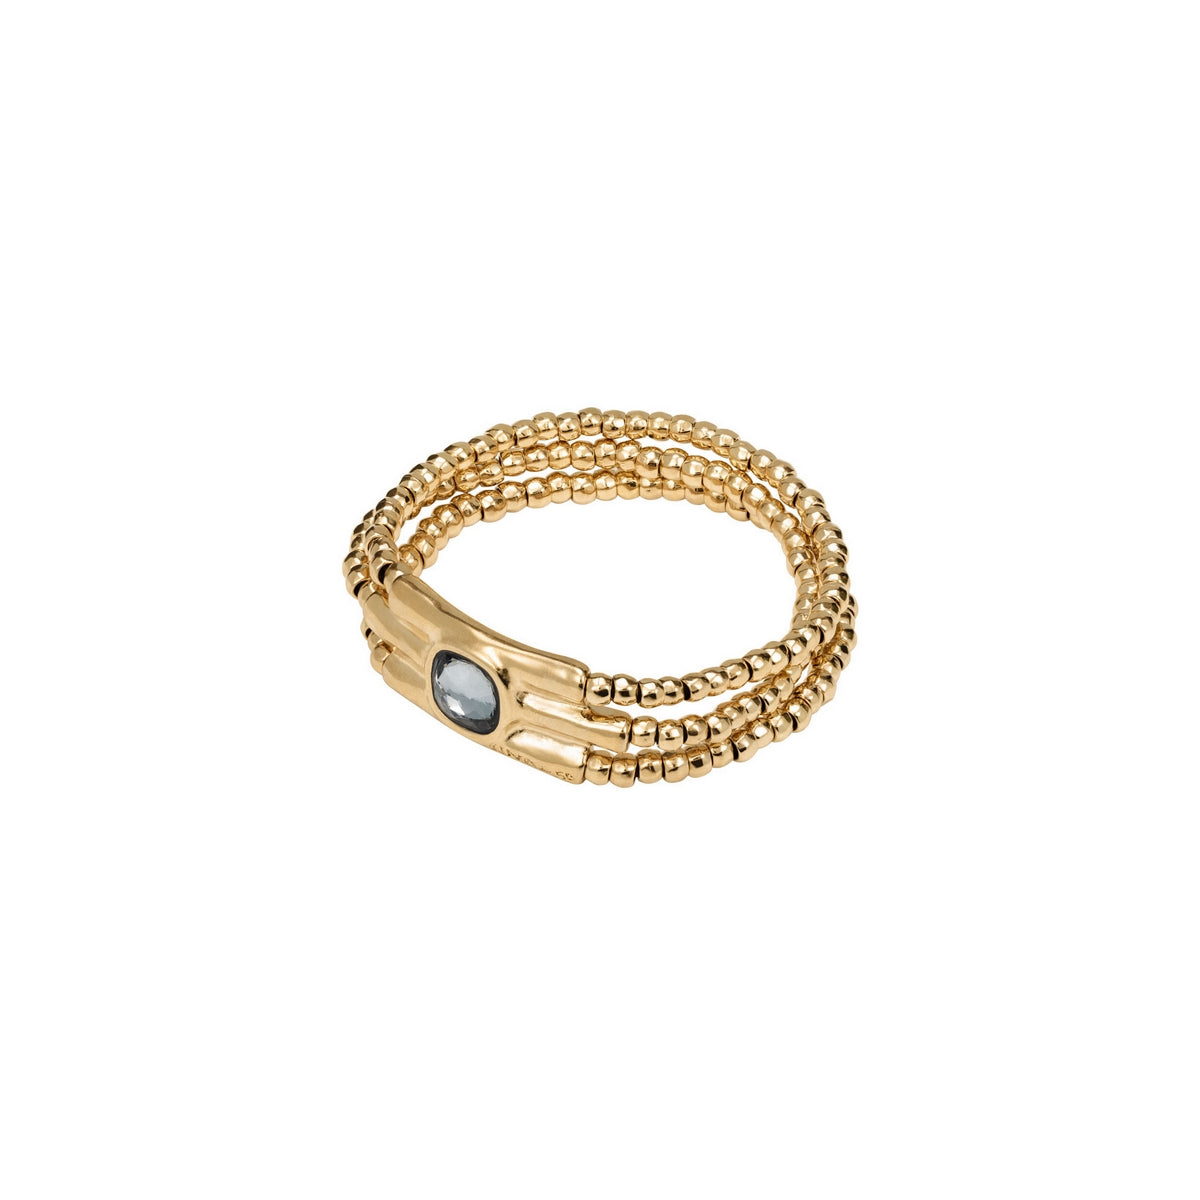 uno de 50 waterfalls elastic 3-strand gold-plated metal alloy bracelet with 3-cast tubule charm and grey crystal